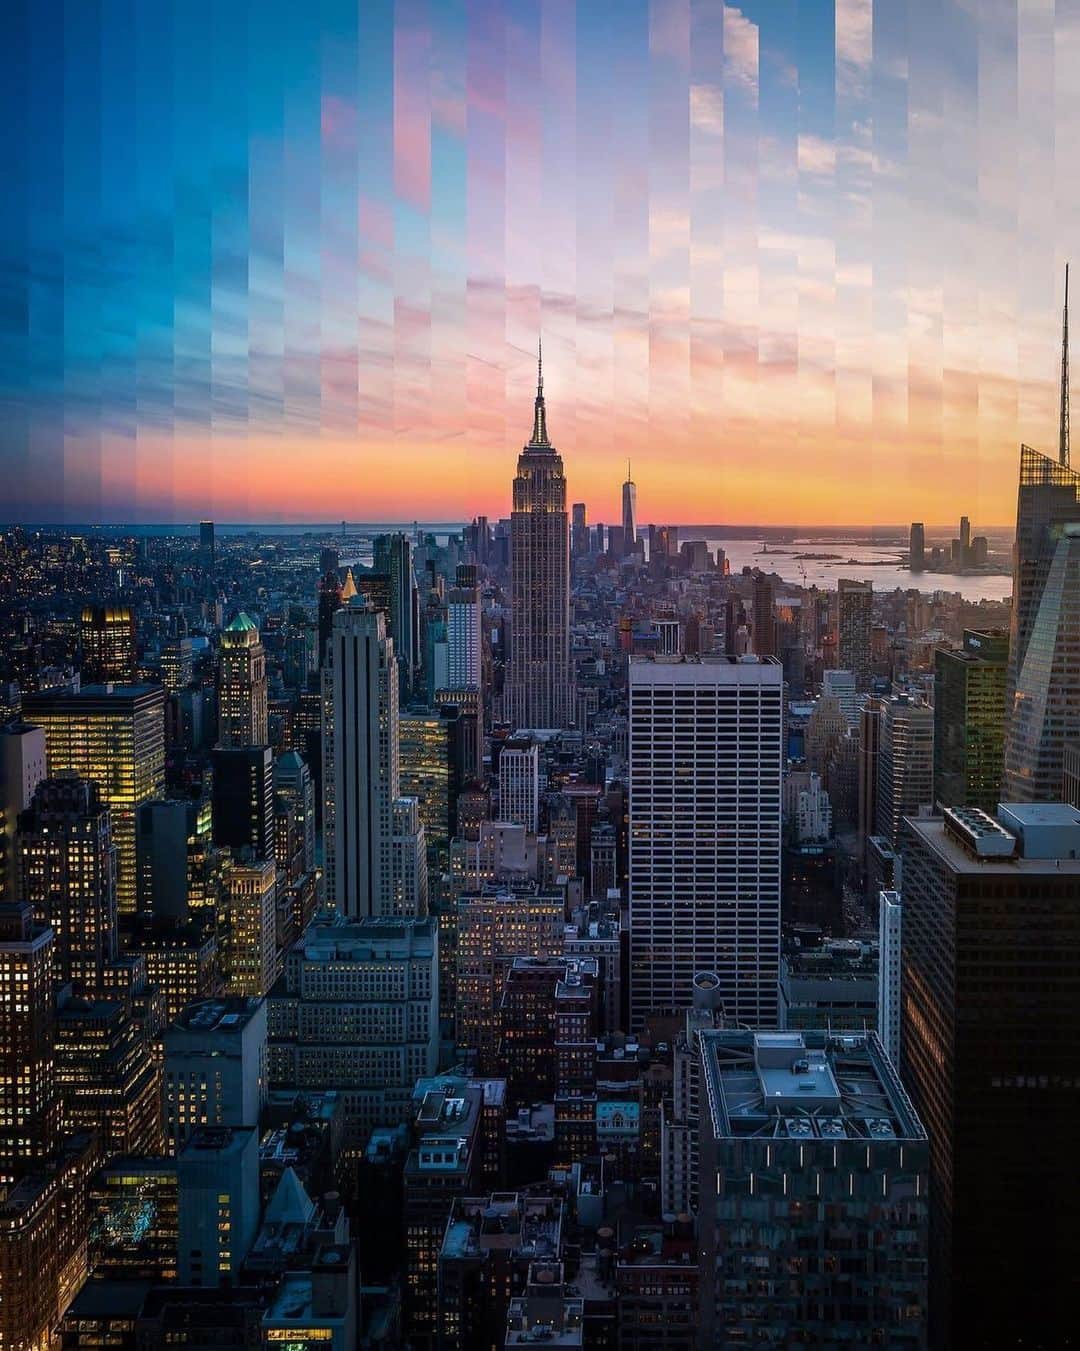 Empire State Buildingさんのインスタグラム写真 - (Empire State BuildingInstagram)「#GIVEAWAY: Win a pair of tickets to visit our Observatory on 2/21/21, along with a complimentary professional photoshoot!  ⠀⠀⠀⠀⠀⠀⠀⠀⠀   TO ENTER: 👇  ⭐️ Follow us (we check!) ⭐️ Comment below & tag someone you’d want to take to the #EmpireStateBuilding!  ⭐️ UNLIMITED ENTRIES: 1 comment/tag = 1 entry 🚨NOTE: This is our only account! Any other account that reaches out to you about this giveaway is a scam. Please ignore and report the account! 🚨  ⠀⠀⠀⠀⠀⠀⠀⠀⠀   Giveaway ends tonight at 11:59PM EST!  ⠀⠀⠀⠀⠀⠀⠀⠀⠀   📷: @zura.nyc  ⠀⠀⠀⠀⠀⠀⠀⠀⠀   ⠀⠀⠀⠀⠀⠀⠀⠀⠀   ⠀⠀⠀⠀⠀⠀⠀⠀⠀   ⠀⠀⠀⠀⠀⠀⠀⠀⠀   ⠀⠀⠀⠀⠀⠀⠀⠀⠀   ⠀⠀⠀⠀⠀⠀⠀⠀⠀   ⠀⠀⠀⠀⠀⠀⠀⠀⠀   ⠀⠀⠀⠀⠀⠀⠀⠀⠀   ⠀⠀⠀⠀⠀⠀⠀⠀⠀   ⠀⠀⠀⠀⠀⠀⠀⠀⠀   ⠀⠀⠀⠀⠀⠀⠀⠀⠀   ⠀⠀⠀⠀⠀⠀⠀⠀⠀   ⠀⠀⠀⠀⠀⠀⠀⠀⠀   ⠀⠀⠀⠀⠀⠀⠀⠀⠀   ⠀⠀⠀⠀⠀⠀⠀⠀⠀   ⠀⠀⠀⠀⠀⠀⠀⠀⠀   ⠀⠀⠀⠀⠀⠀⠀⠀⠀   ⠀⠀⠀⠀⠀⠀⠀⠀⠀   ⠀⠀⠀⠀⠀⠀⠀⠀⠀   This contest/giveaway is in no way sponsored, endorsed or administered, or associated with Instagram. This giveaway is sponsored by @empirestatebldg. The contest will run from 11:00 AM EST 2/17/21 until 11:59PM EST 2/17/21. Giveaway is open only to residents 18+ years of age, of the 50 United States and District of Columbia. Tap bio link for official rules.」2月18日 1時07分 - empirestatebldg